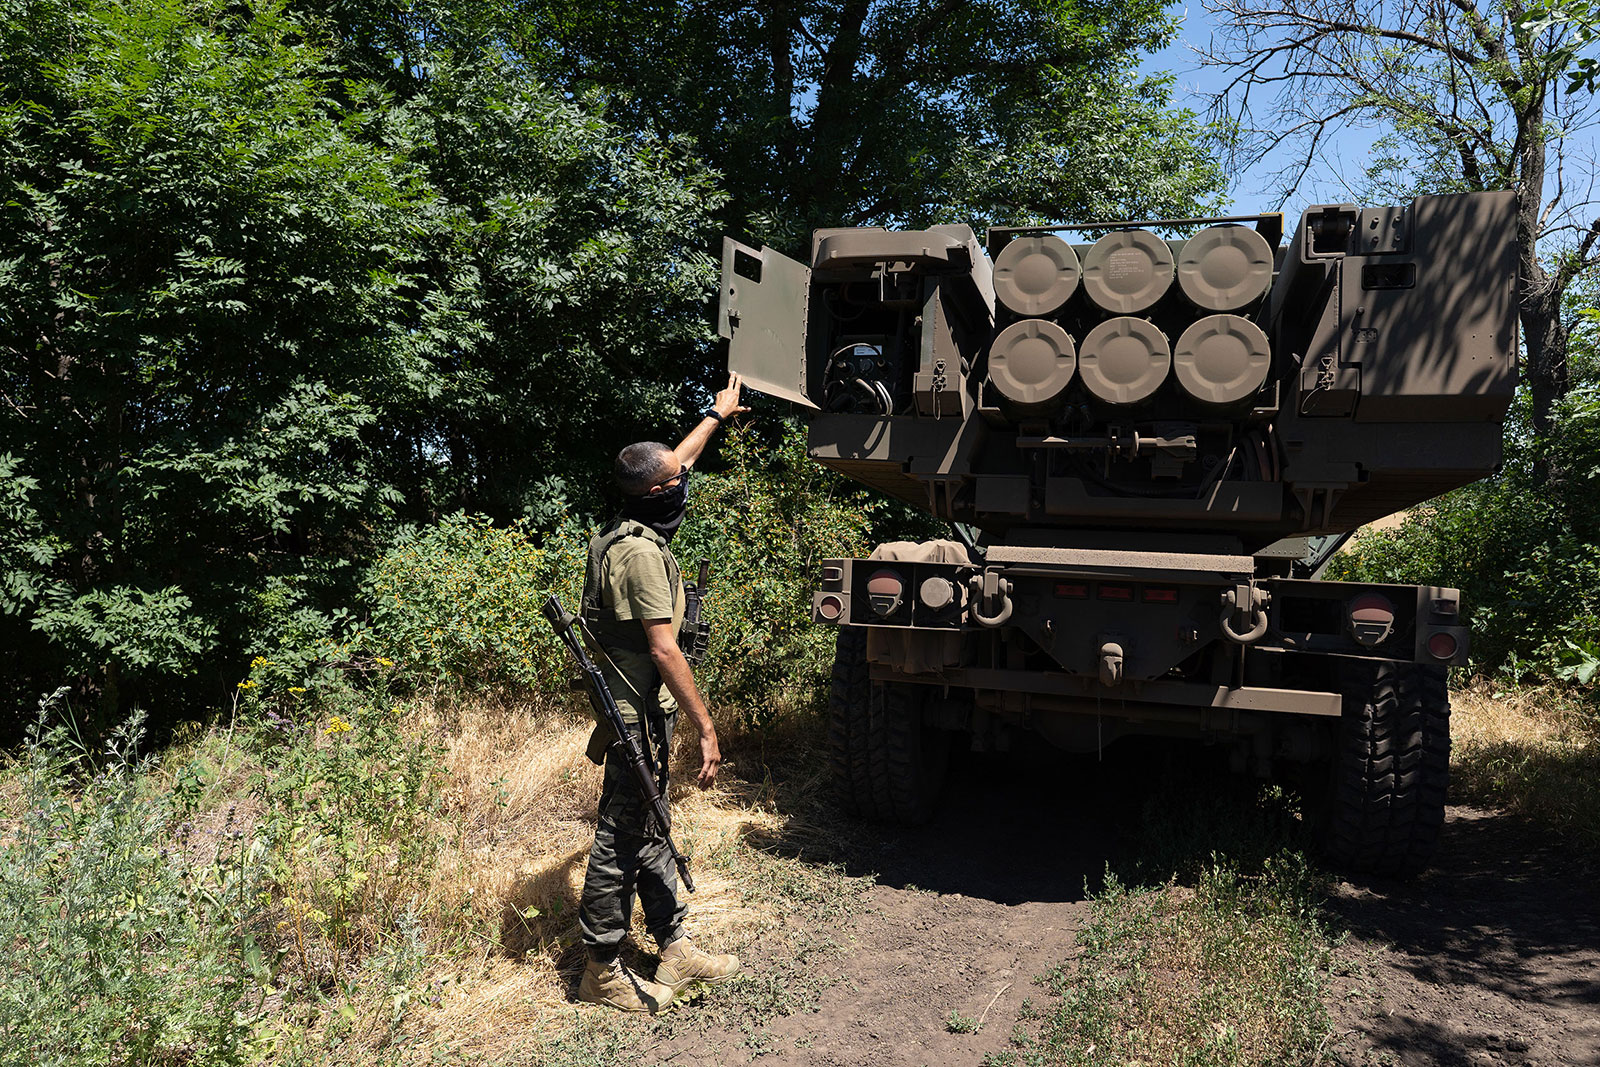 A Ukrainian commander shows off the rockets on a HIMARS vehicle on July 1.